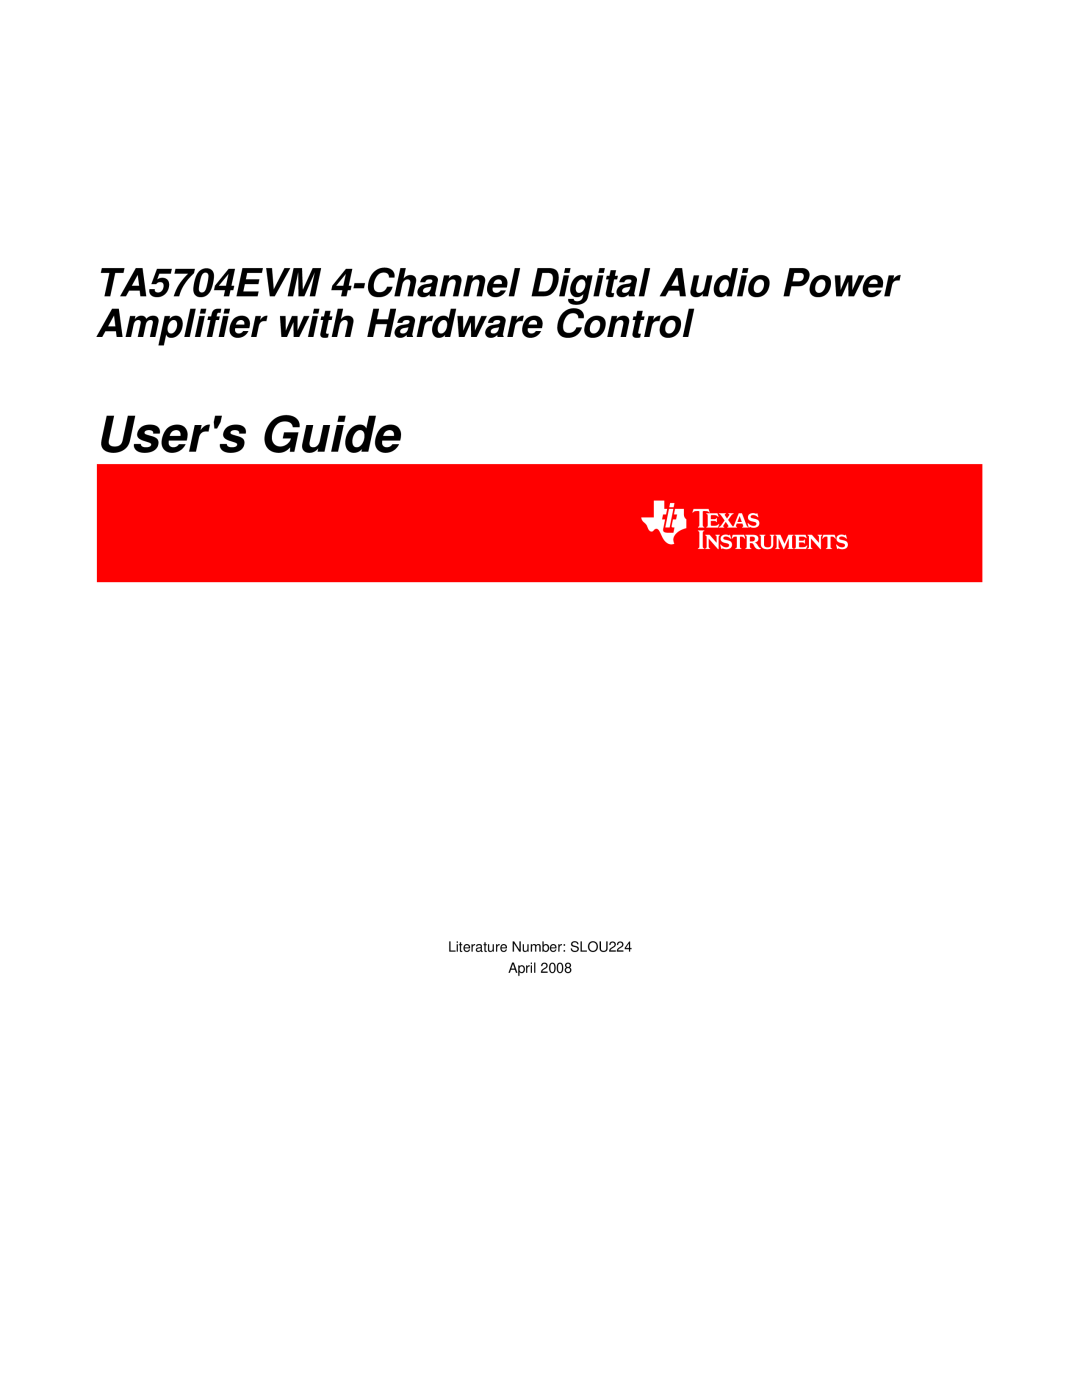 Texas Instruments TA5704EVM manual Users Guide, Literature Number SLOU224 April 